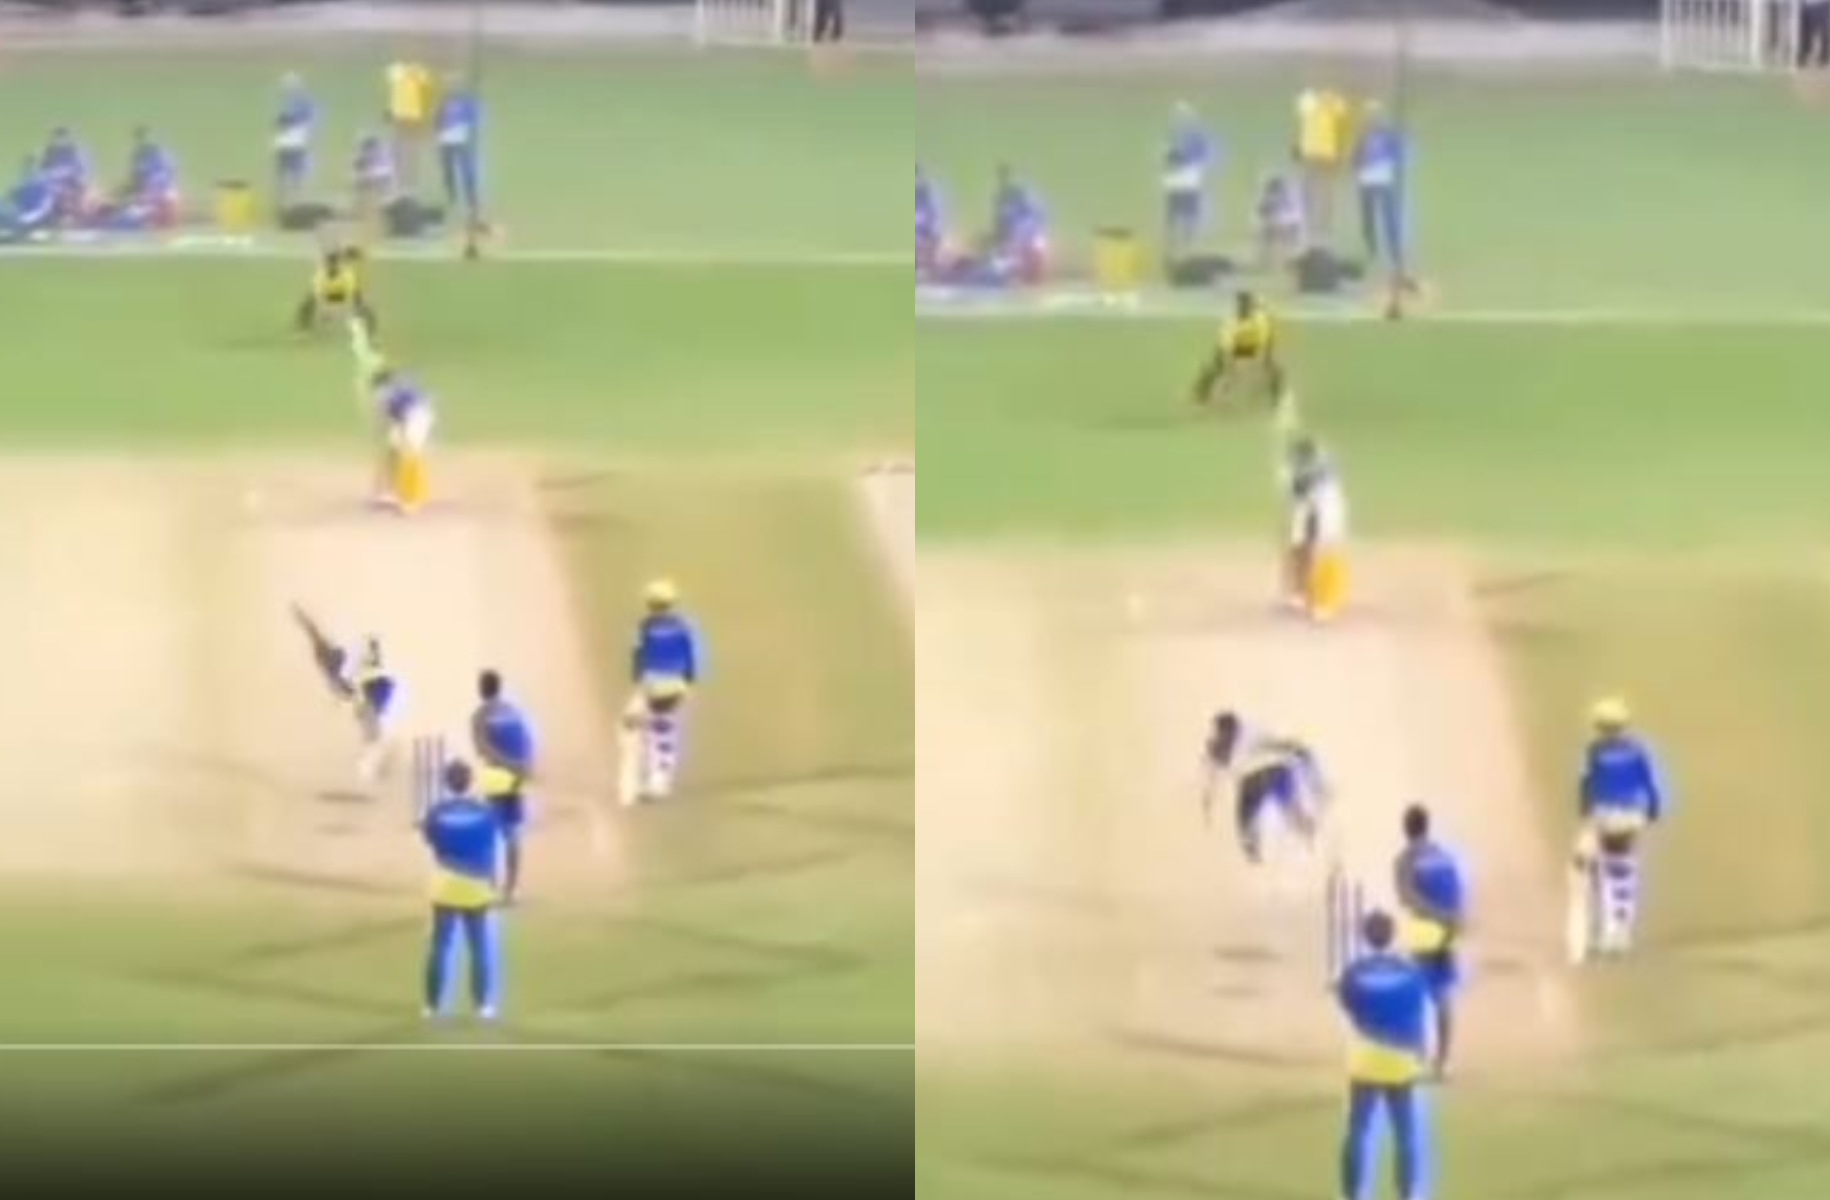 MS Dhoni hit his trademark helicopter shot | X